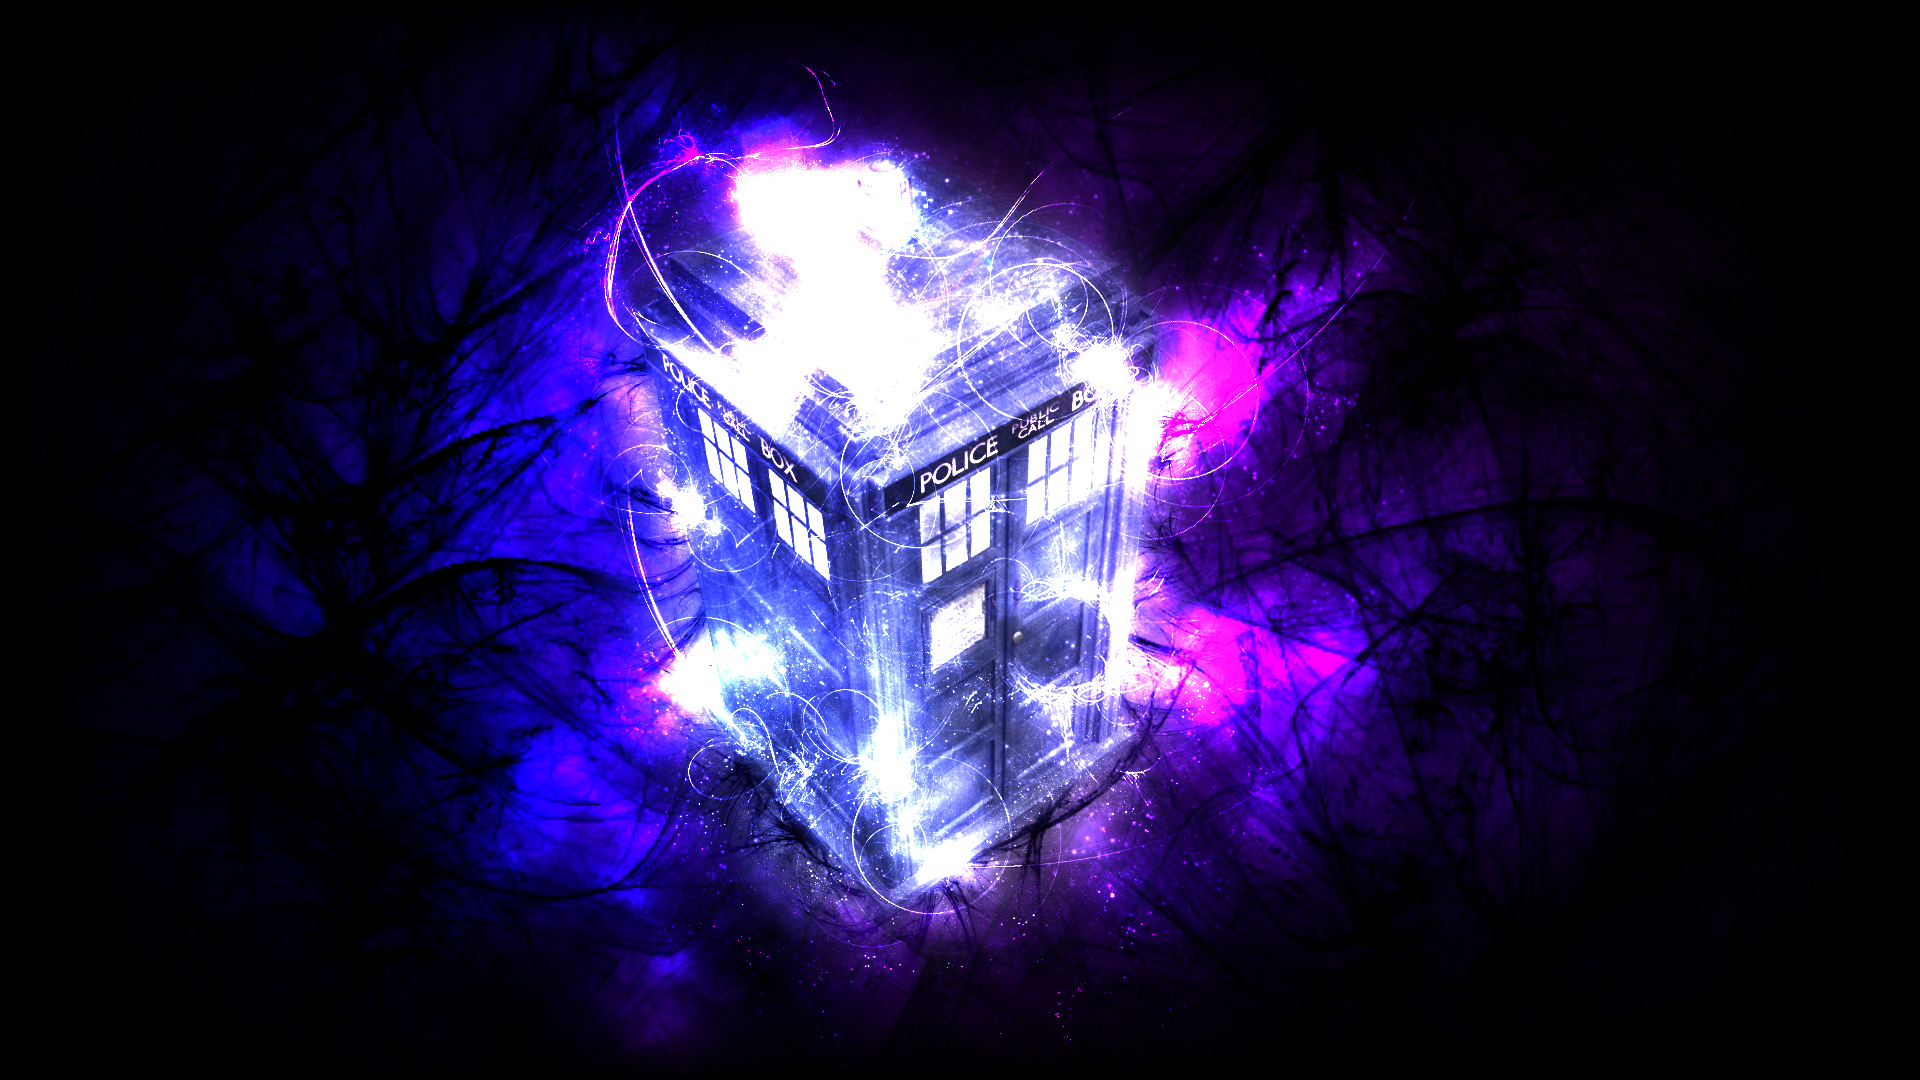 Doctor Who Wallpaper Pictures A7Z » WALLPAPERUN.COM